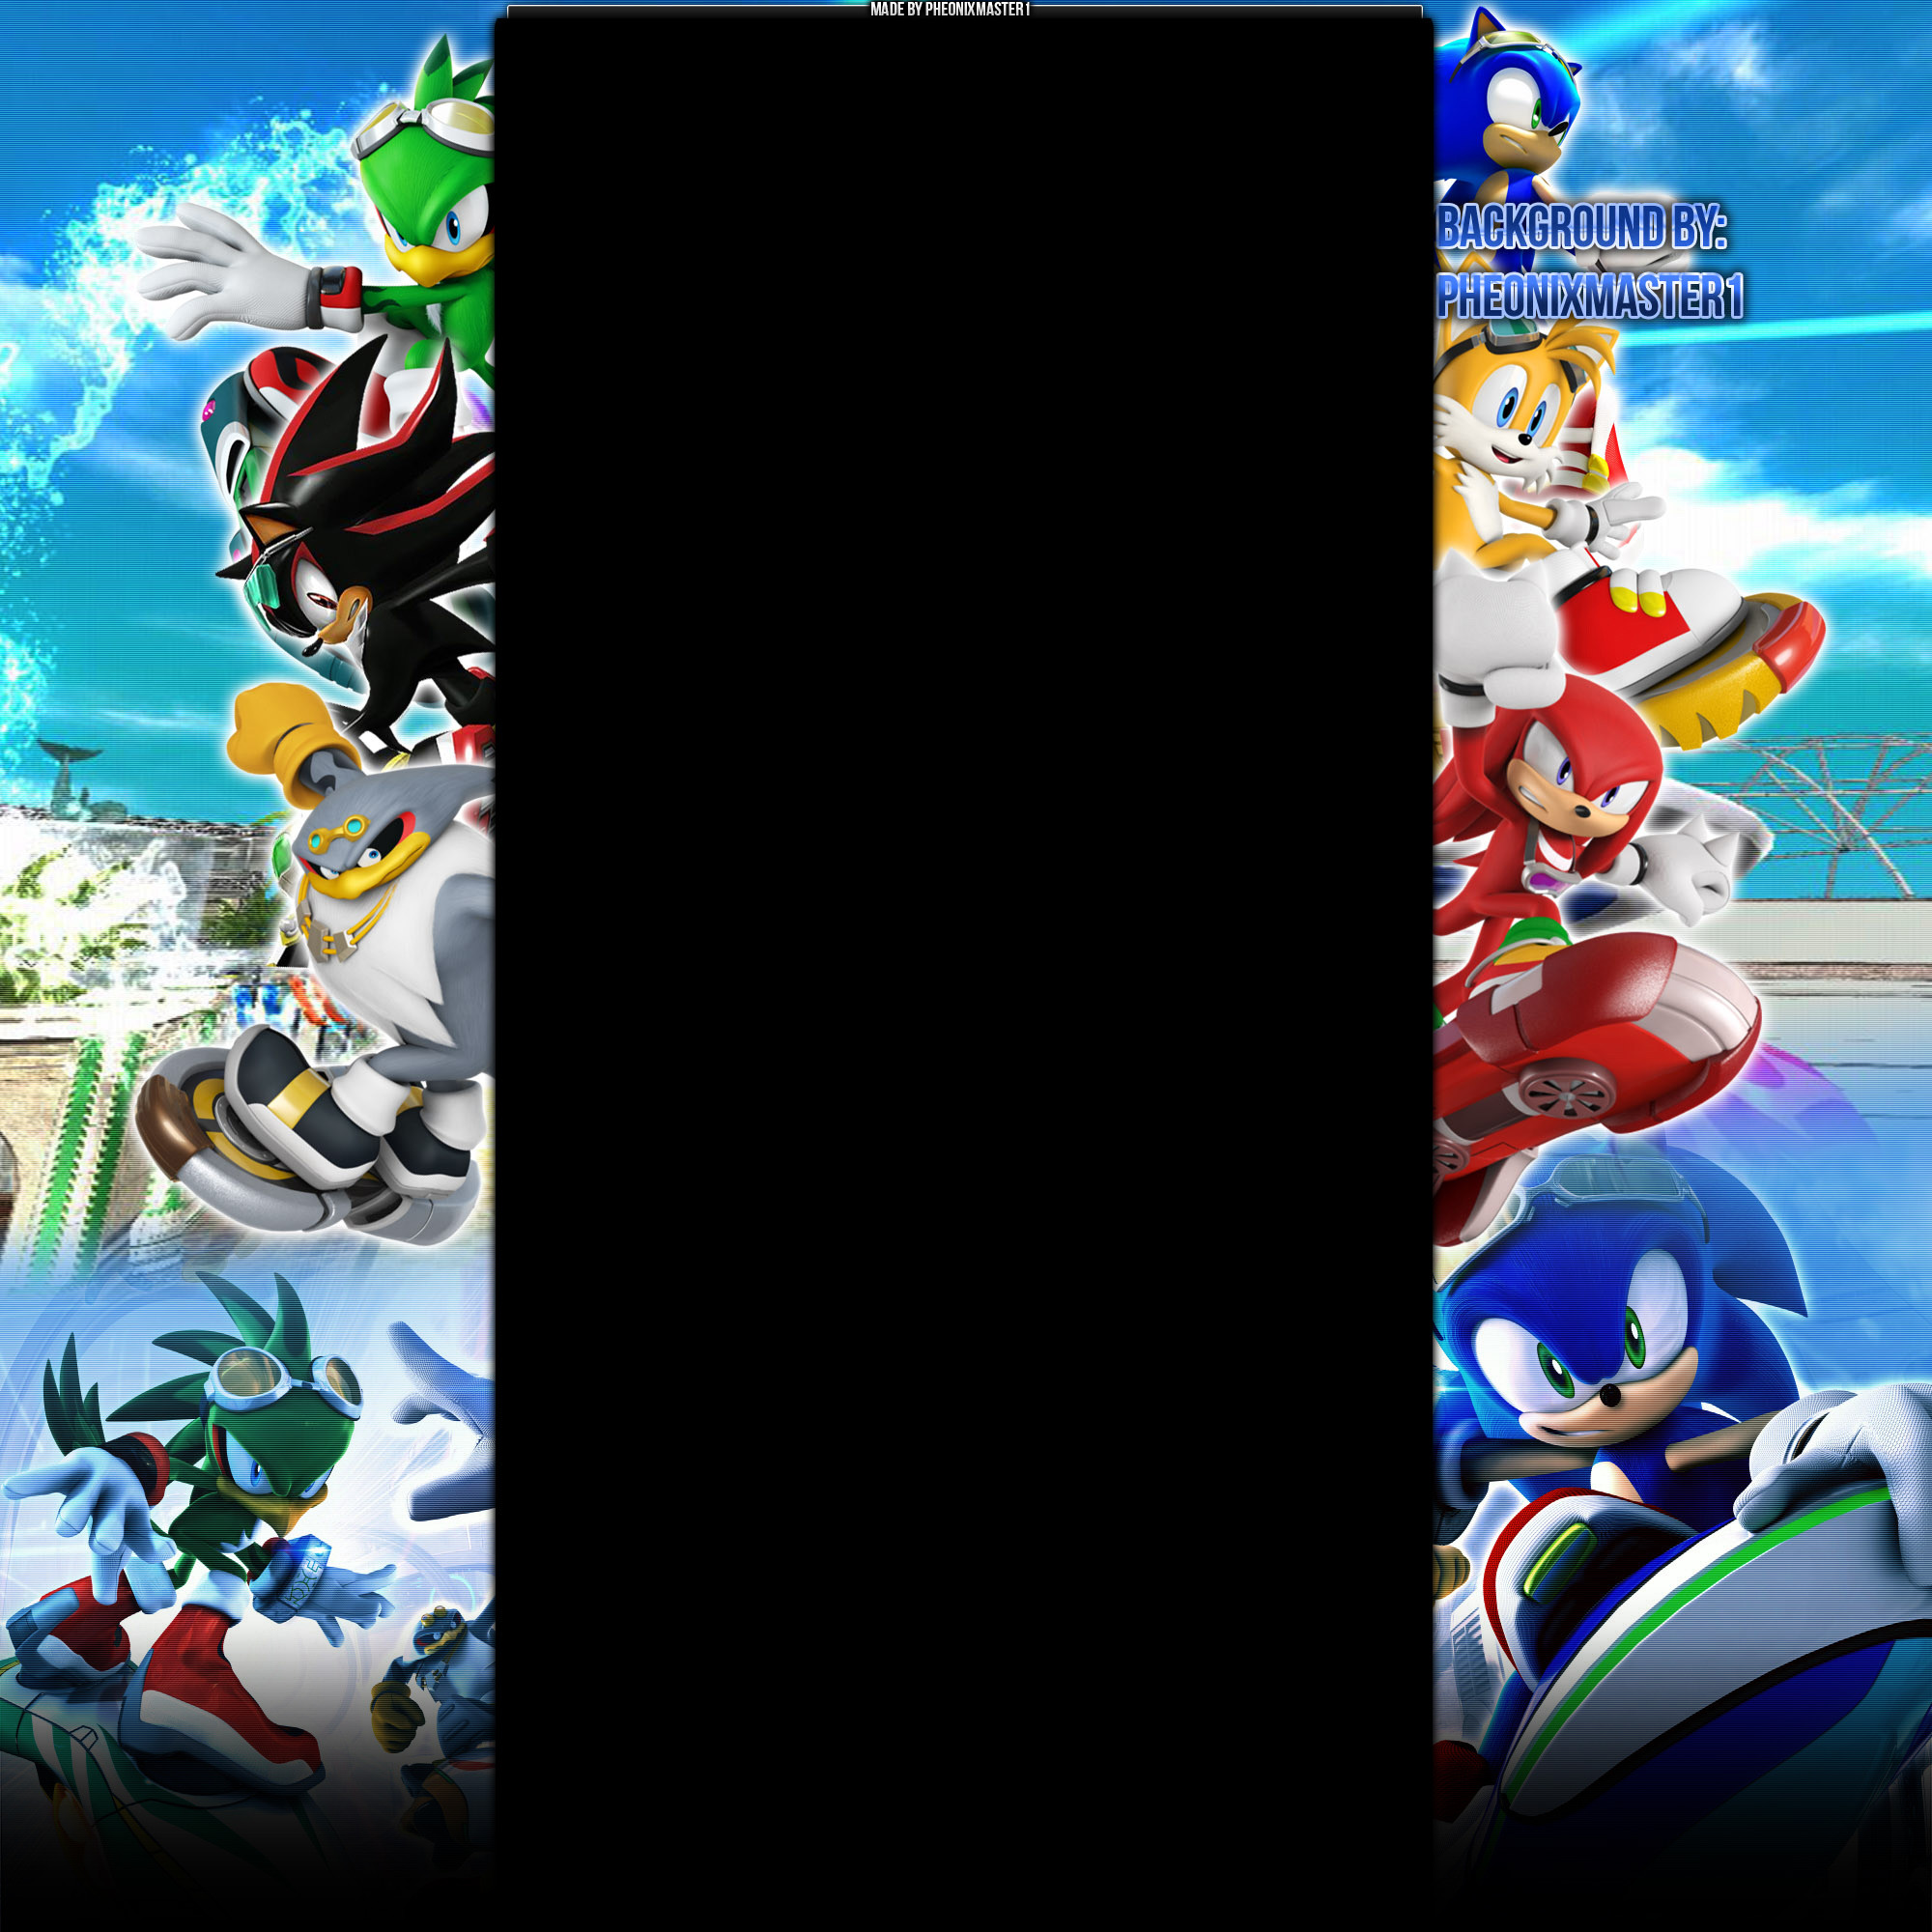 2000x2000 Sonic Riders Youtube background by Pheonixmaster1 Sonic Riders Youtube  background by Pheonixmaster1